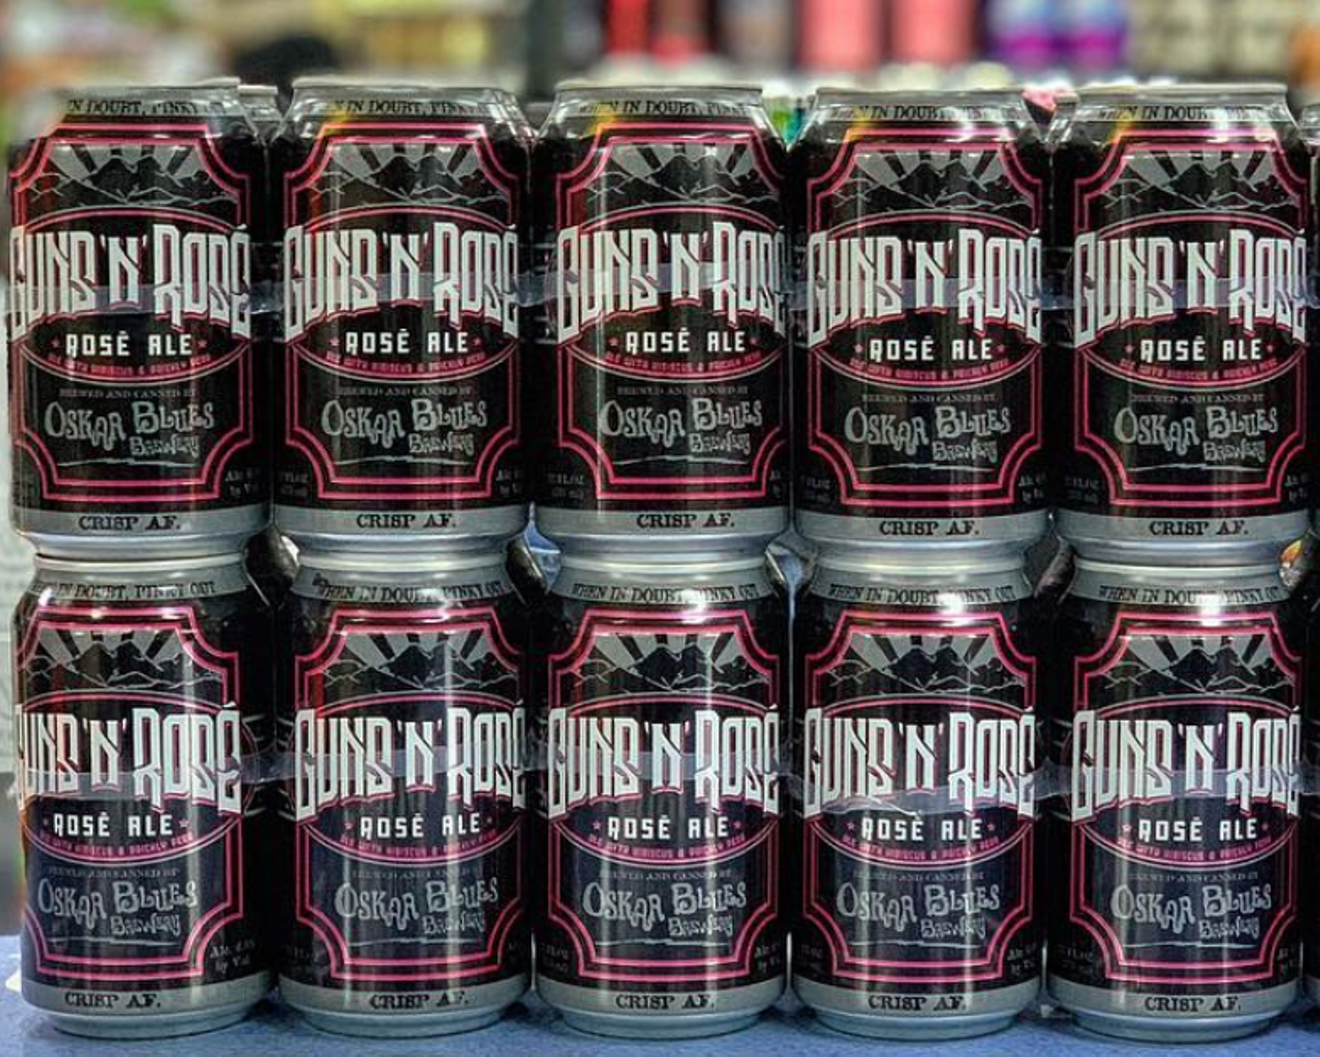 Oskar Blues's Guns 'N' Rosé debuted in cans in February across the country.